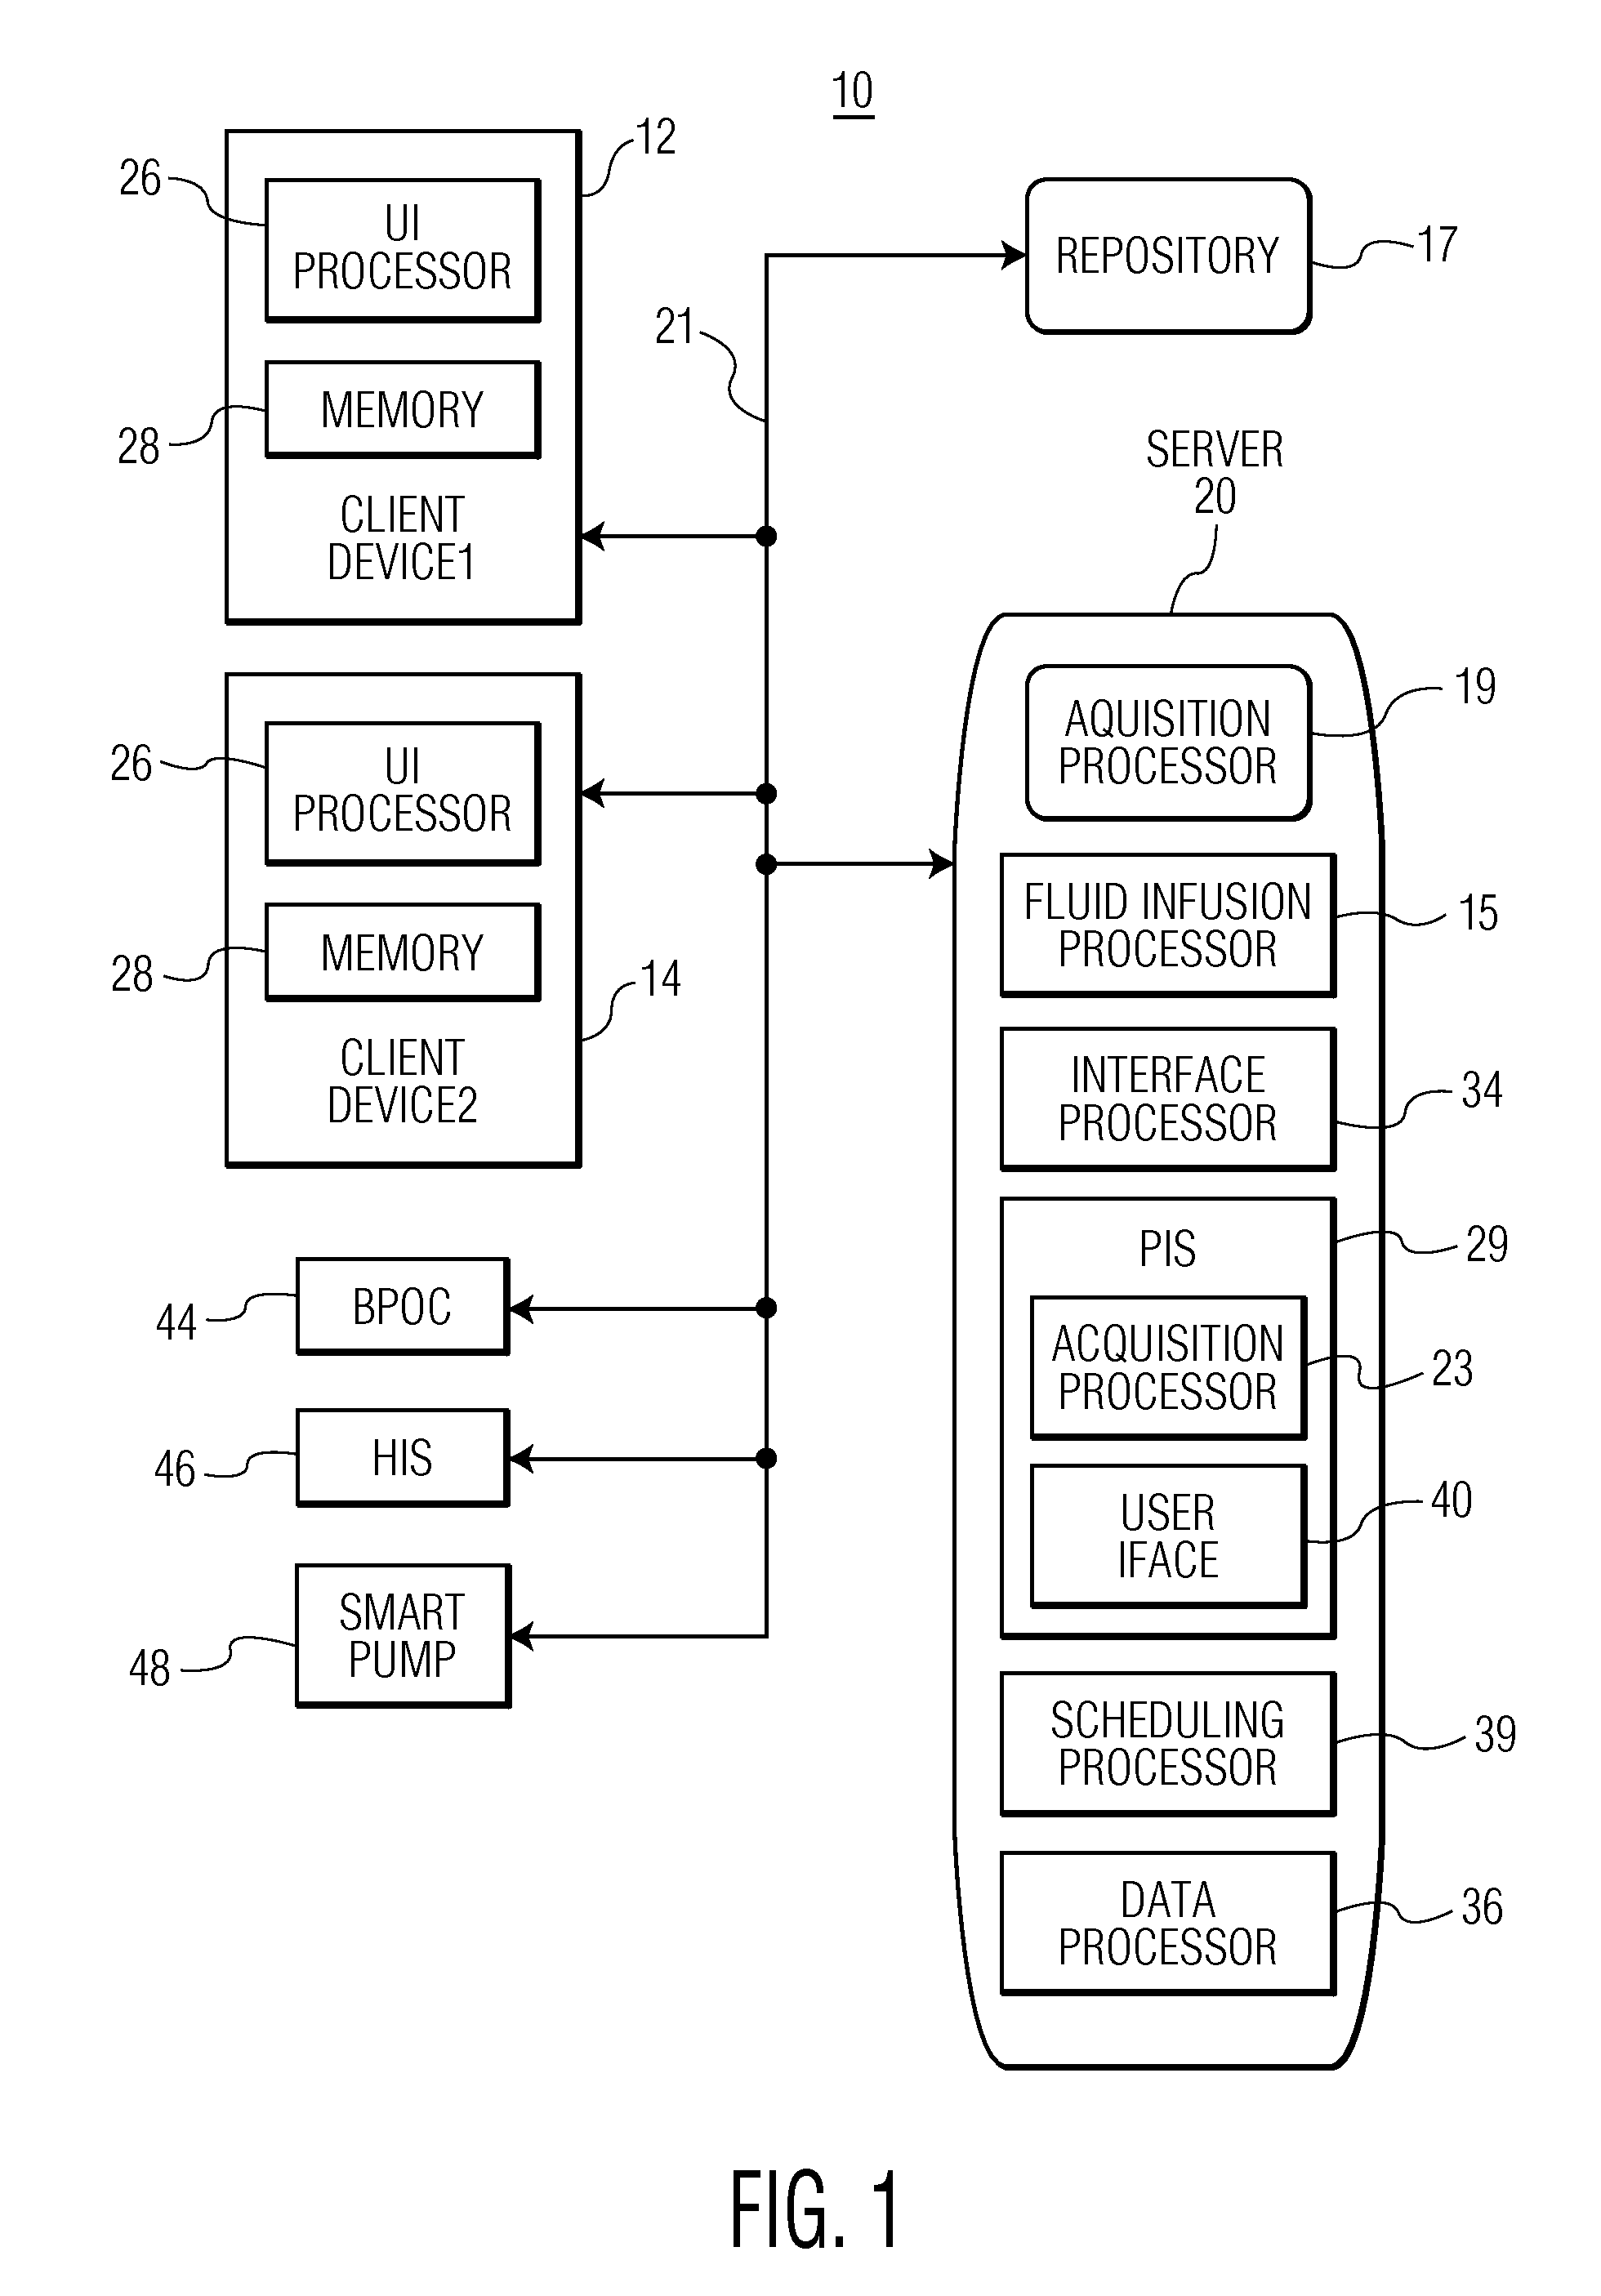 Integrated Medication and Infusion Monitoring System